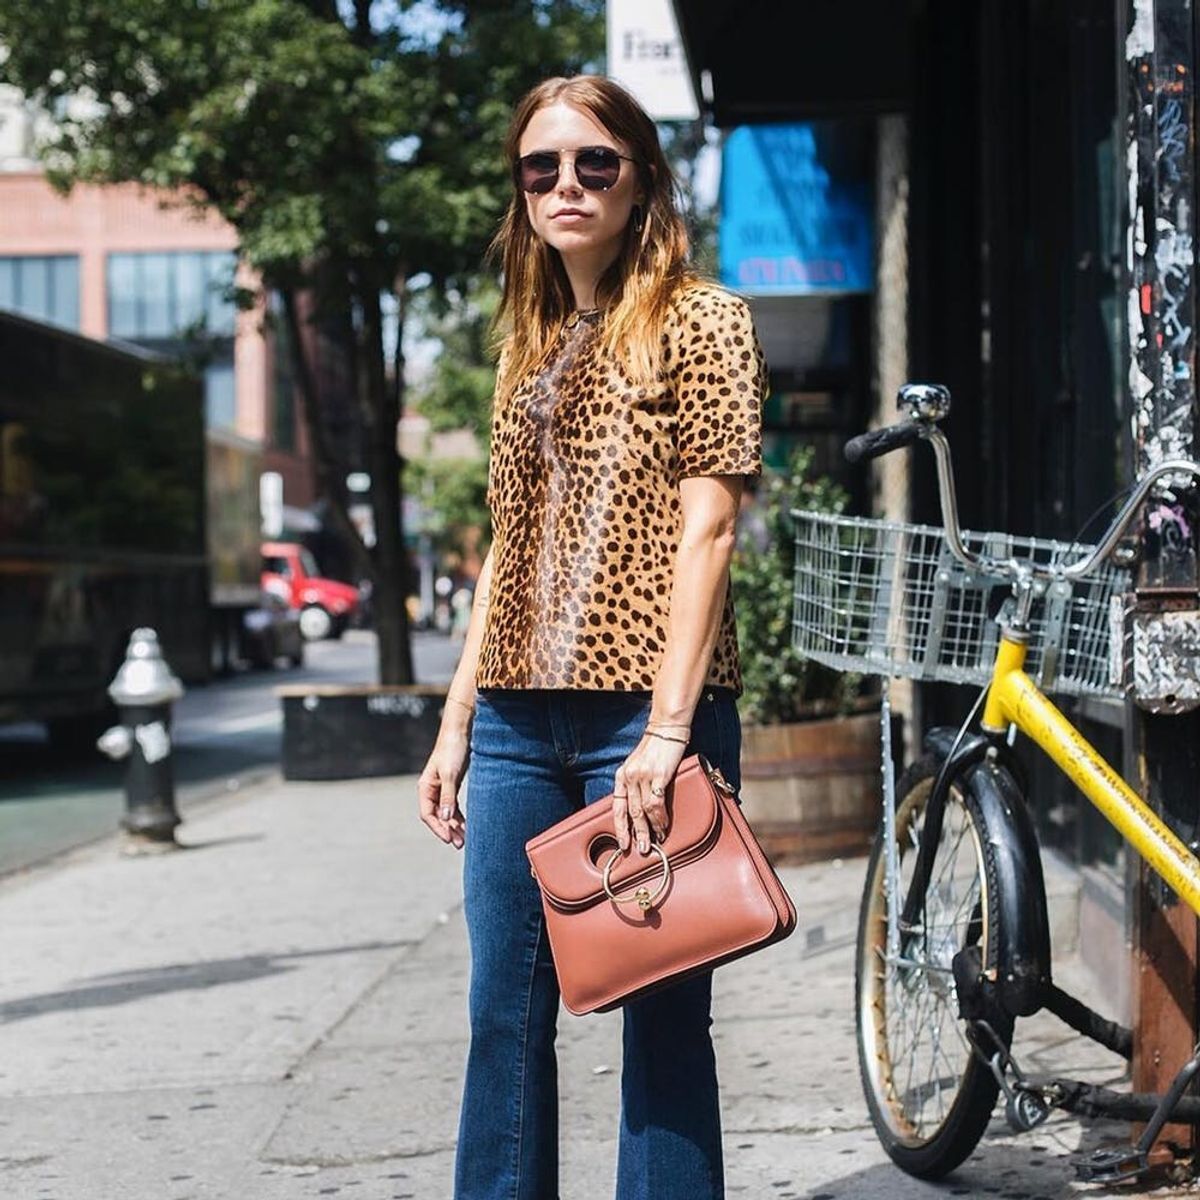 15 of the Best Off-Duty Street Style Looks Straight from Fashion Week